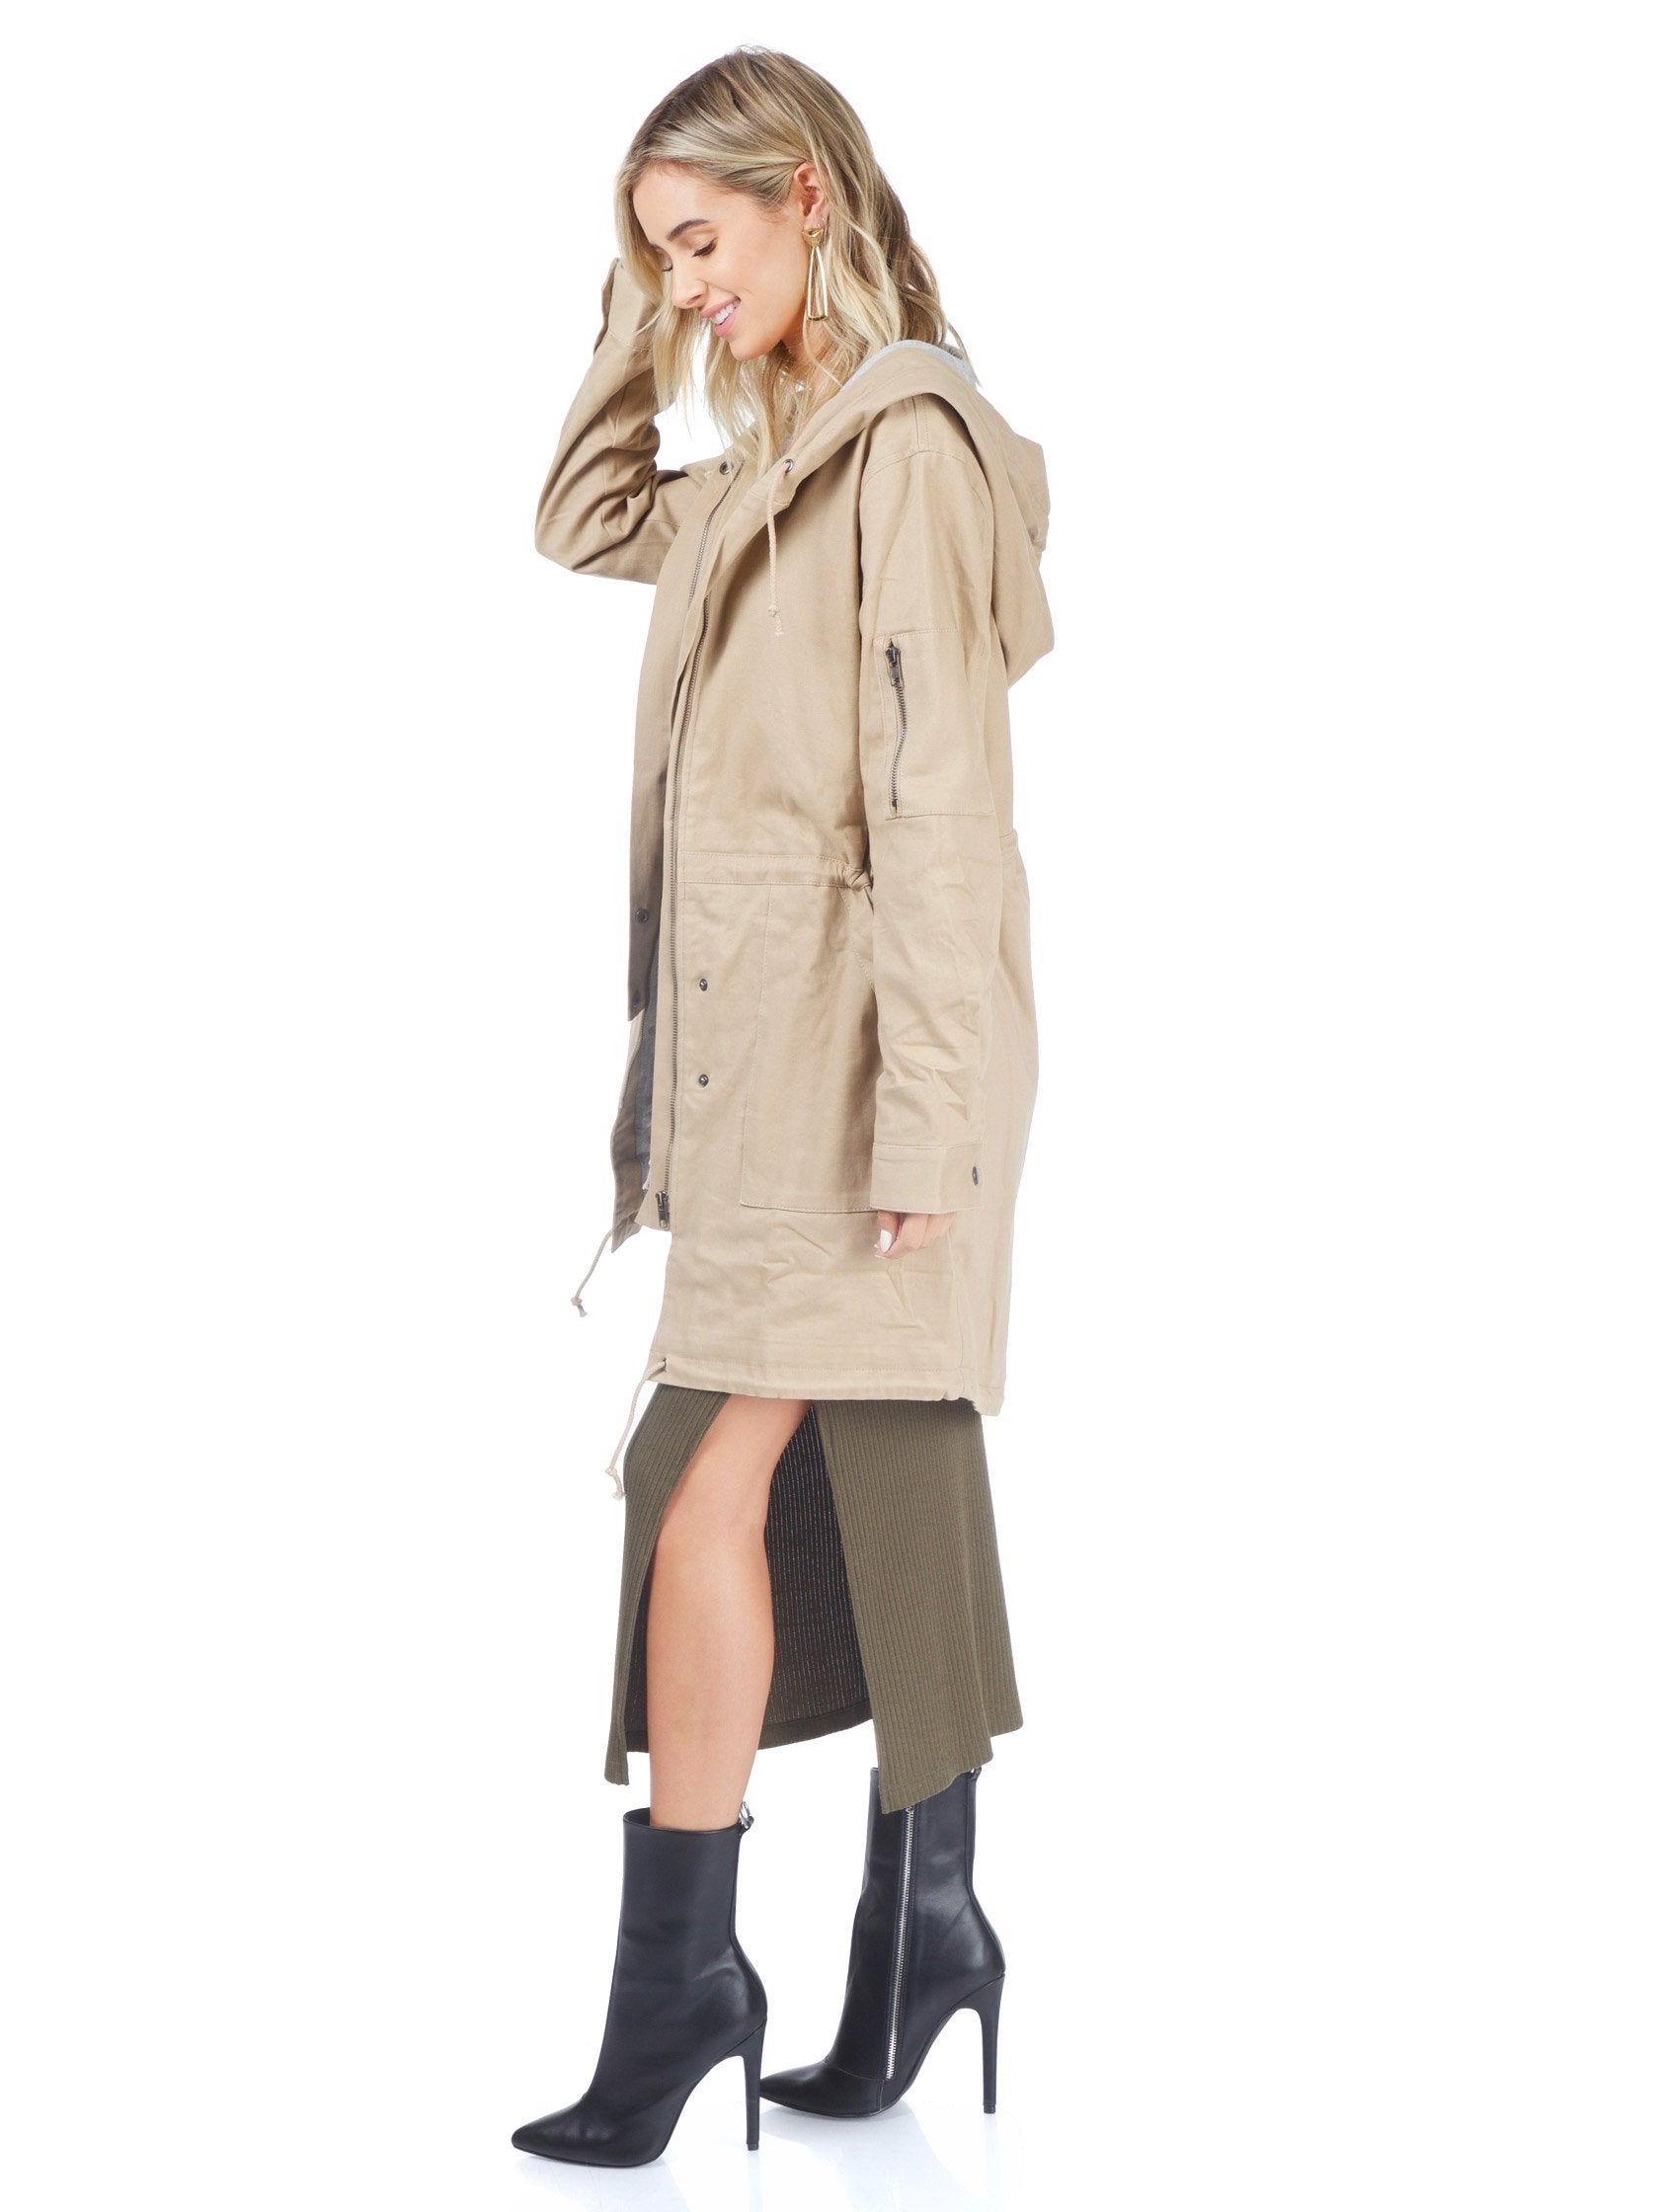 Girl outfit in a jacket rental from Lush called Tan Cargo Jacket